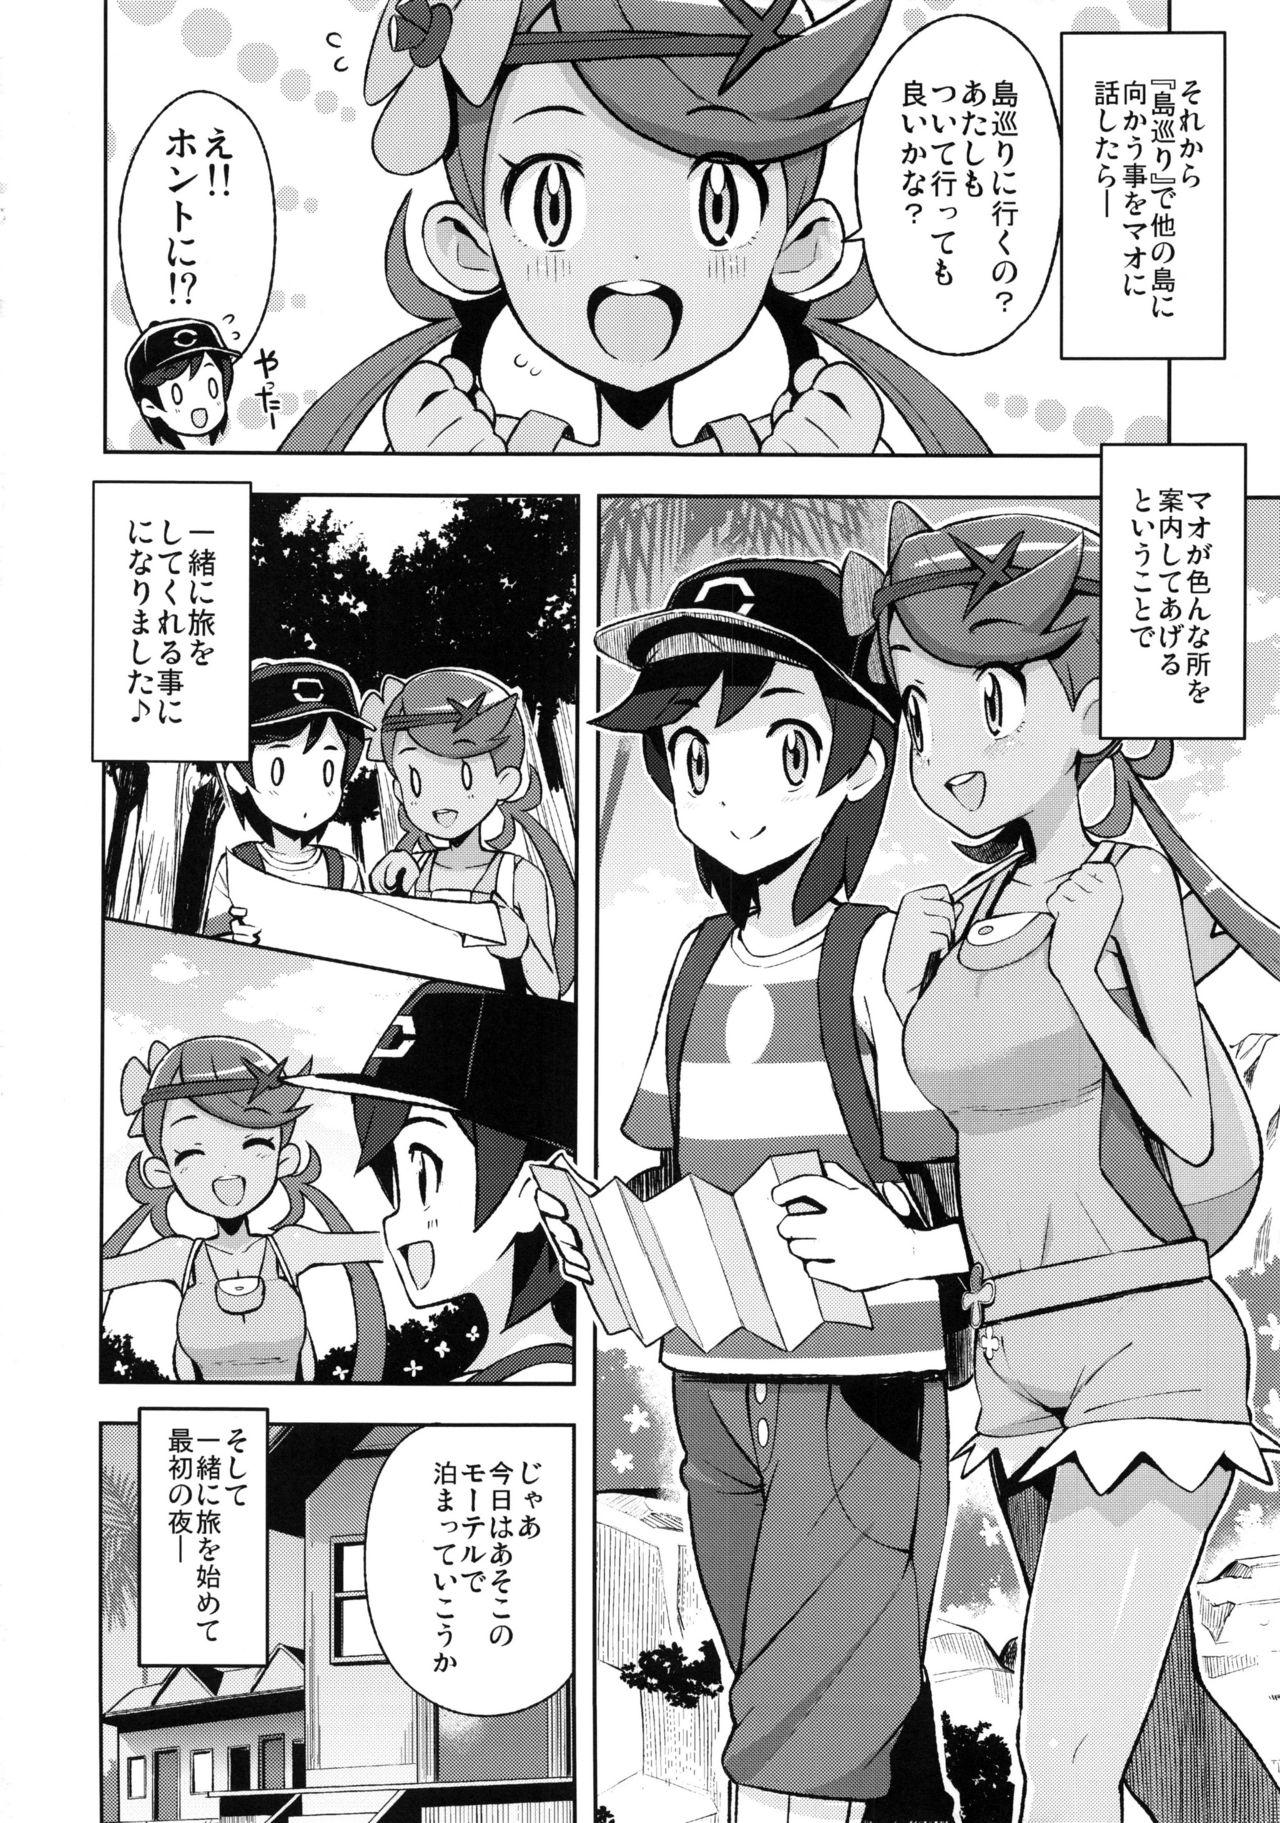 Wives MAO FRIENDS - Pokemon Orgasms - Page 11